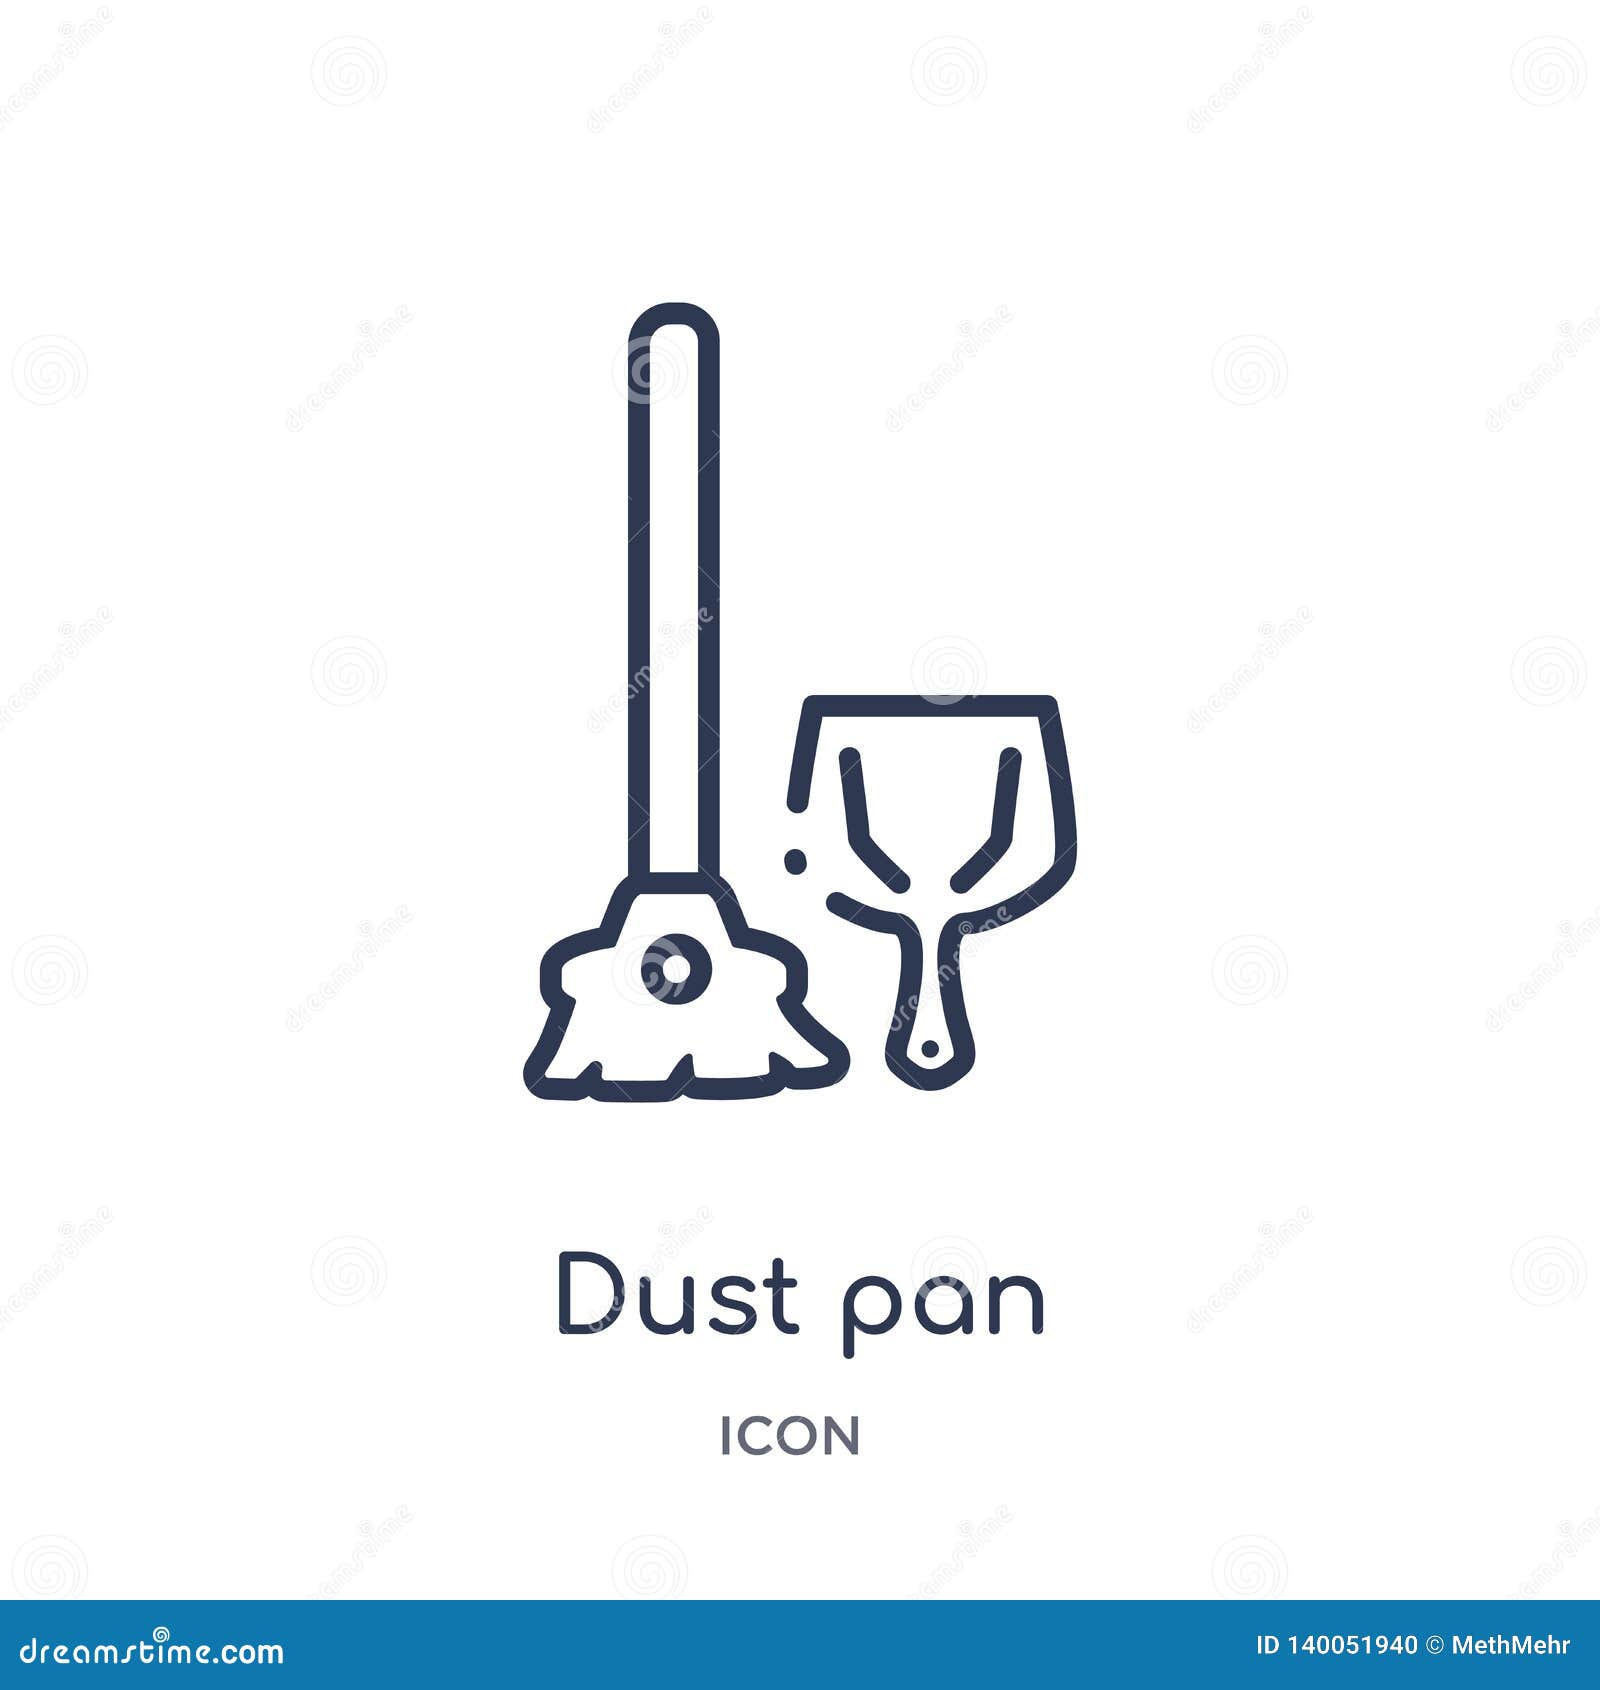 https://thumbs.dreamstime.com/z/linear-dust-pan-icon-cleaning-outline-collection-thin-line-vector-isolated-white-background-trendy-illustration-140051940.jpg